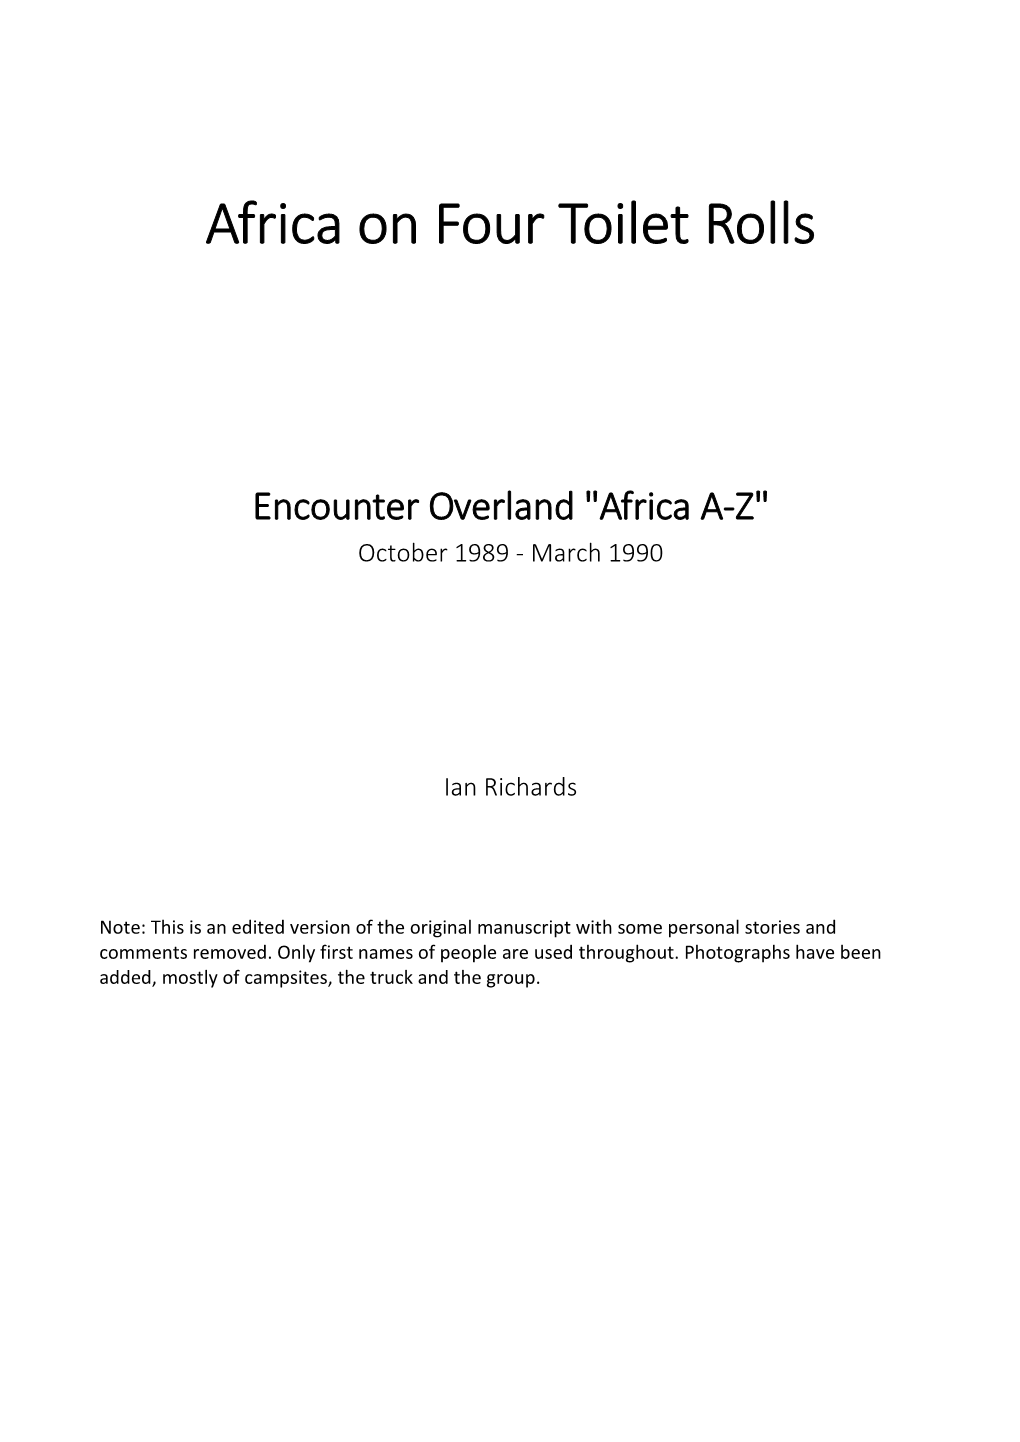 Africa on Four Toilet Rolls